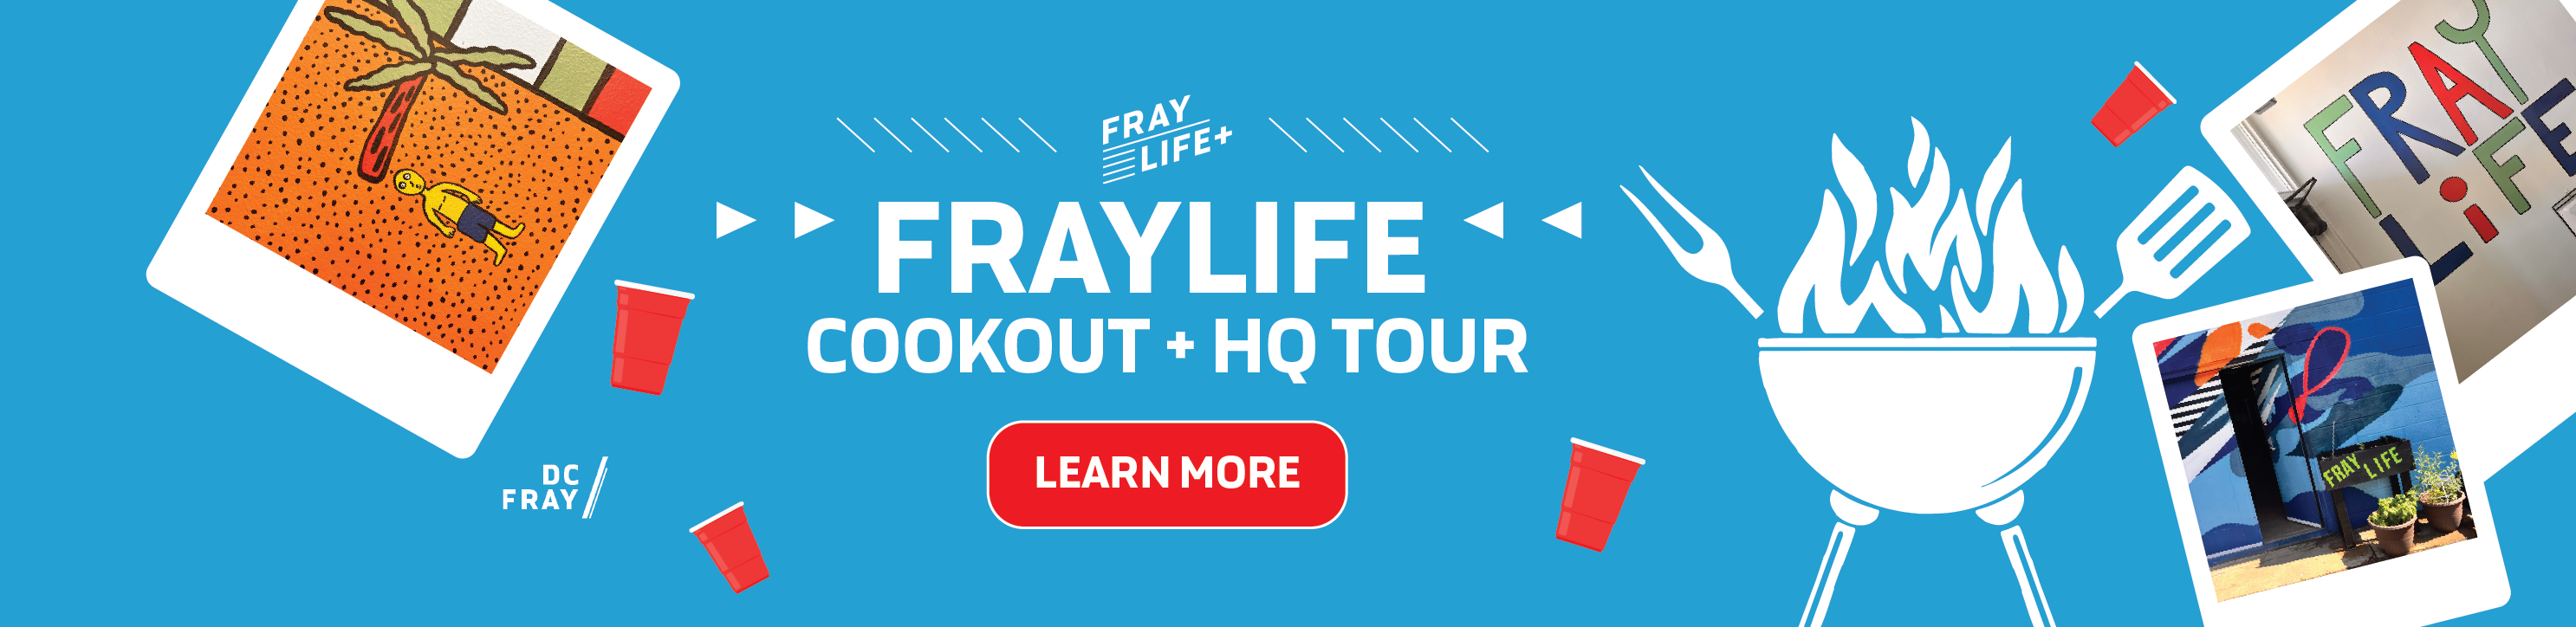 FrayLife Plus Summer Cookout + HQ Tour